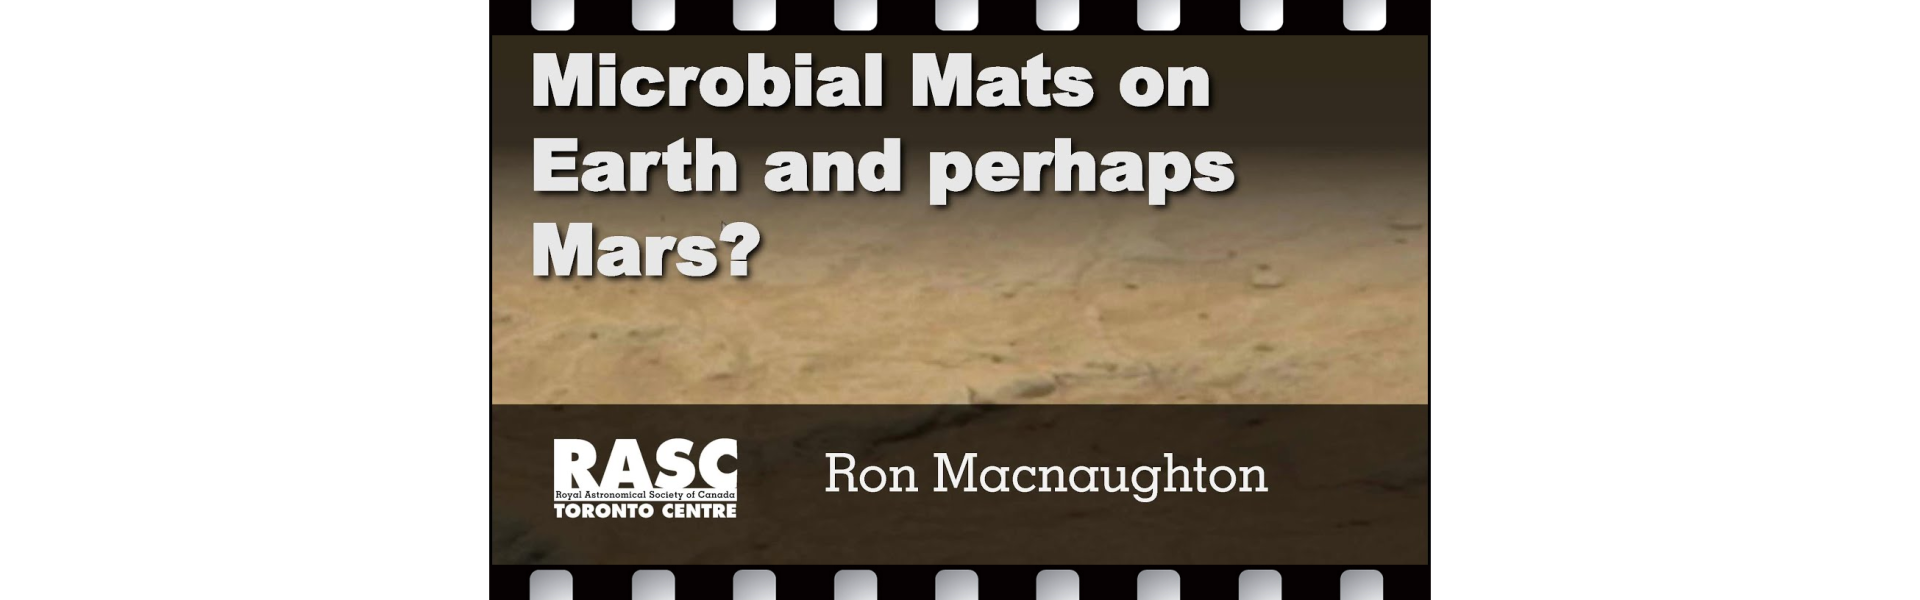 Microbial Mats on Earth and perhaps Mars?